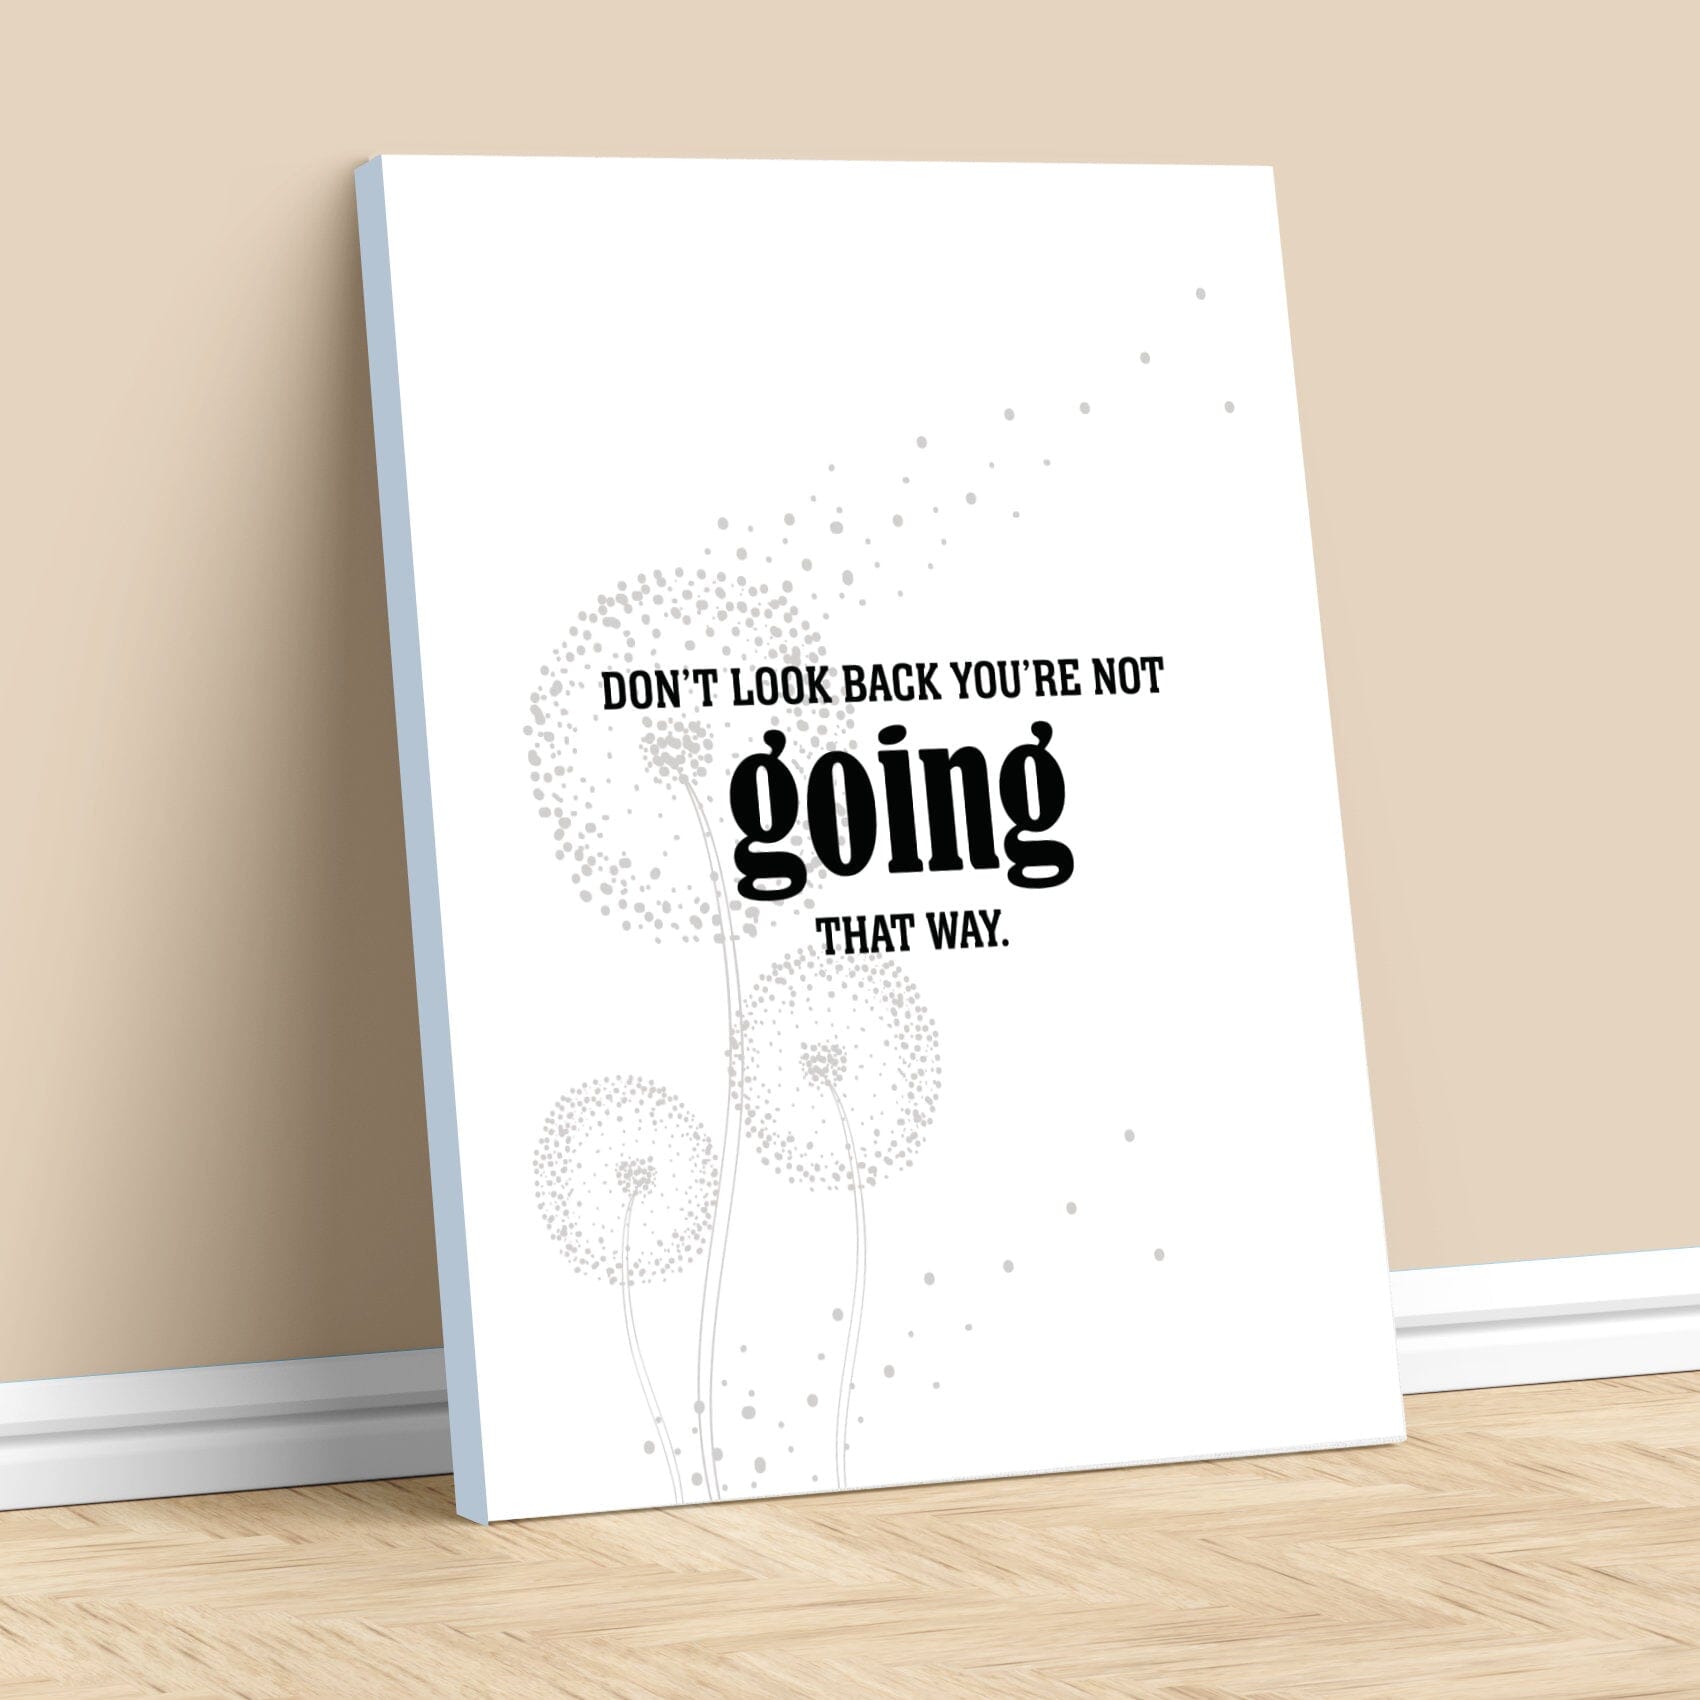 Don't Look Back You're Not Going that Way - Wise Witty Art Wise and Wiseass Quotes Song Lyrics Art 11x14 Canvas Wrap 